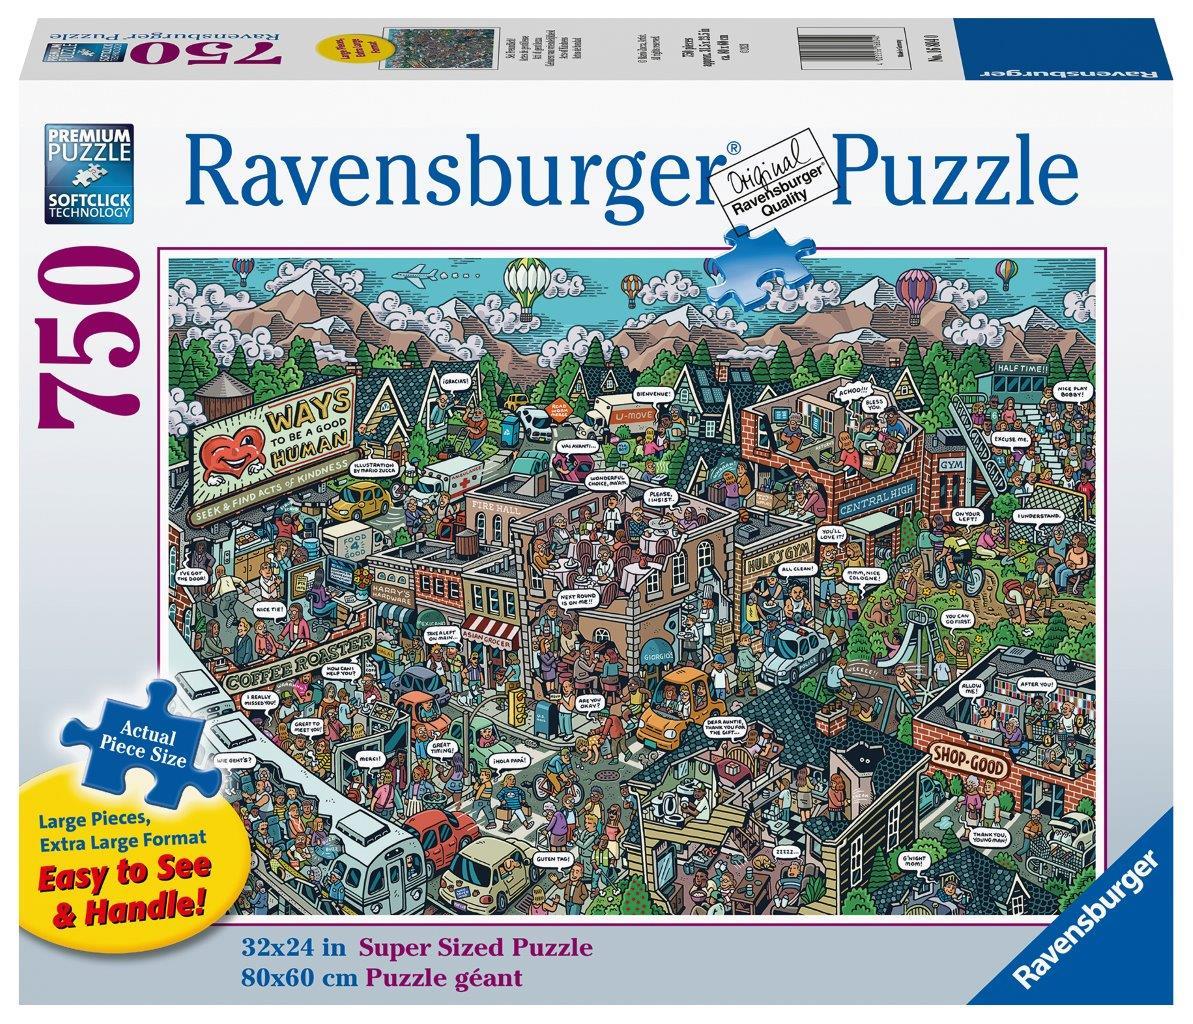 Acts of Kindness Puzzle 750pcLF (Ravensburger Puzzle)